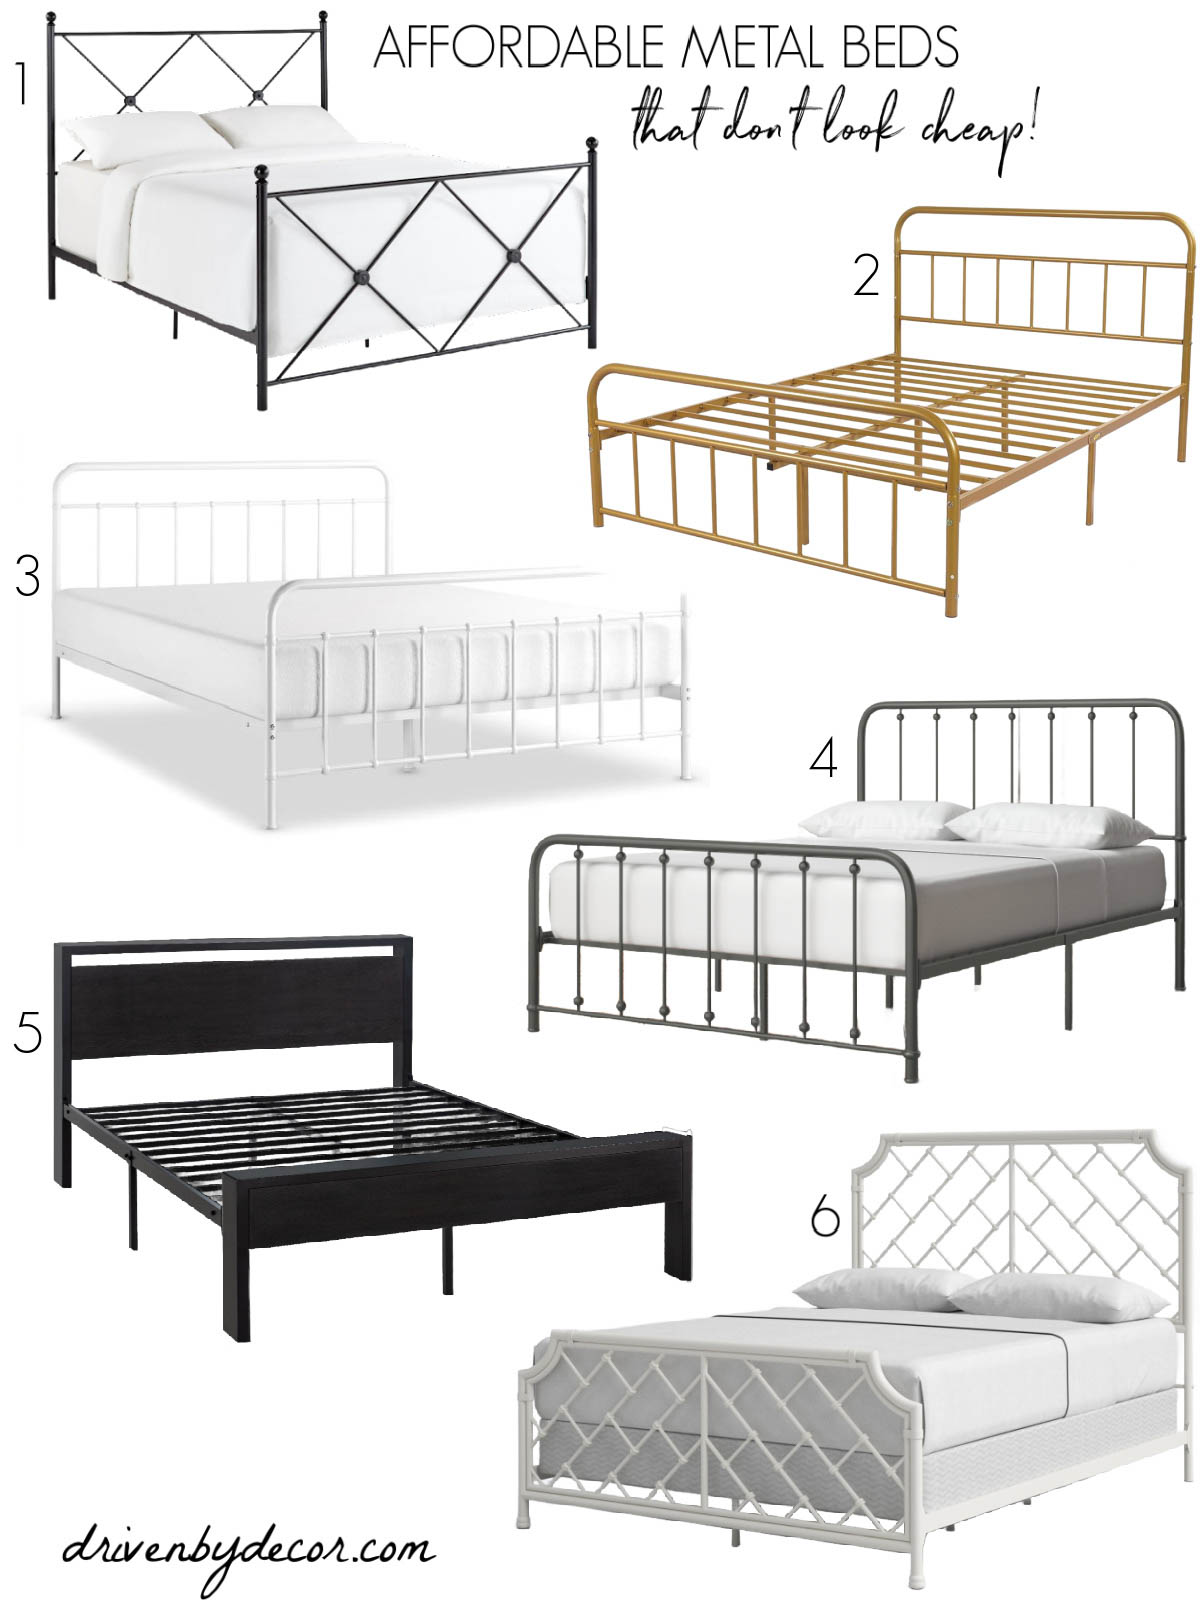 Six affordable beds made of metal